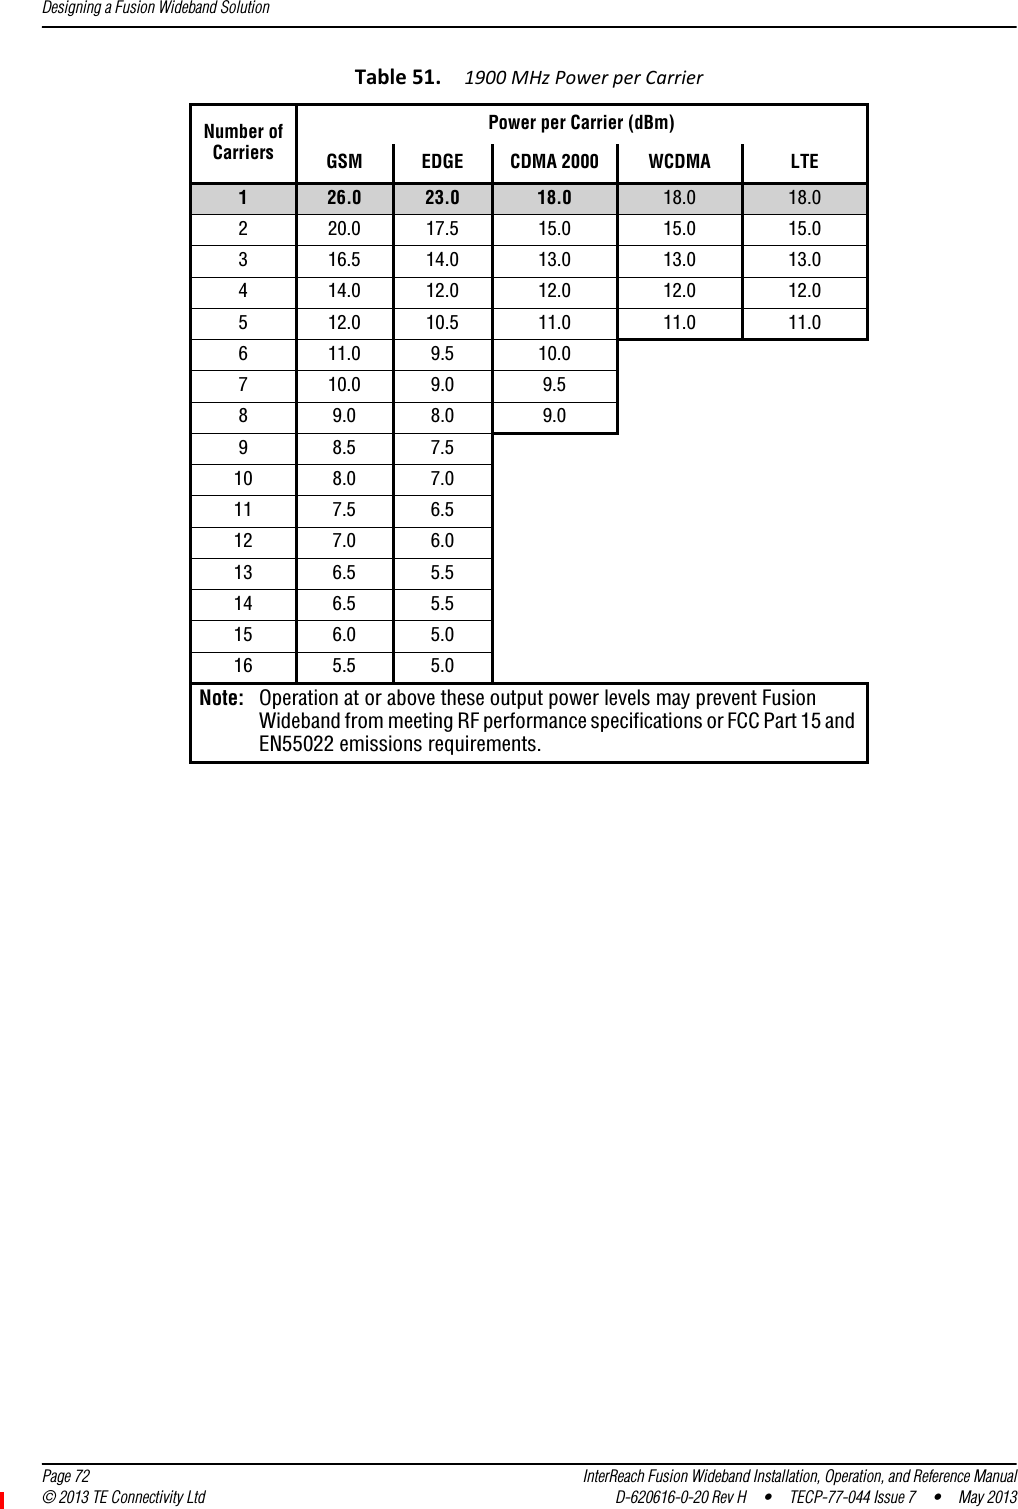 Designing a Fusion Wideband Solution  Page 72 InterReach Fusion Wideband Installation, Operation, and Reference Manual© 2013 TE Connectivity Ltd D-620616-0-20 Rev H  •  TECP-77-044 Issue 7  •  May 2013Table51.1900MHzPowerperCarrierNumber ofCarriersPower per Carrier (dBm)GSM EDGE CDMA 2000 WCDMA LTE126.0 23.0 18.0 18.0 18.0220.0 17.5 15.0 15.0 15.0316.5 14.0 13.0 13.0 13.0414.0 12.0 12.0 12.0 12.0512.0 10.5 11.0 11.0 11.0611.0 9.5 10.0710.0 9.0 9.589.0 8.0 9.098.5 7.510 8.0 7.011 7.5 6.512 7.0 6.013 6.5 5.514 6.5 5.515 6.0 5.016 5.5 5.0Note: Operation at or above these output power levels may prevent Fusion Wideband from meeting RF performance specifications or FCC Part 15 and EN55022 emissions requirements. 